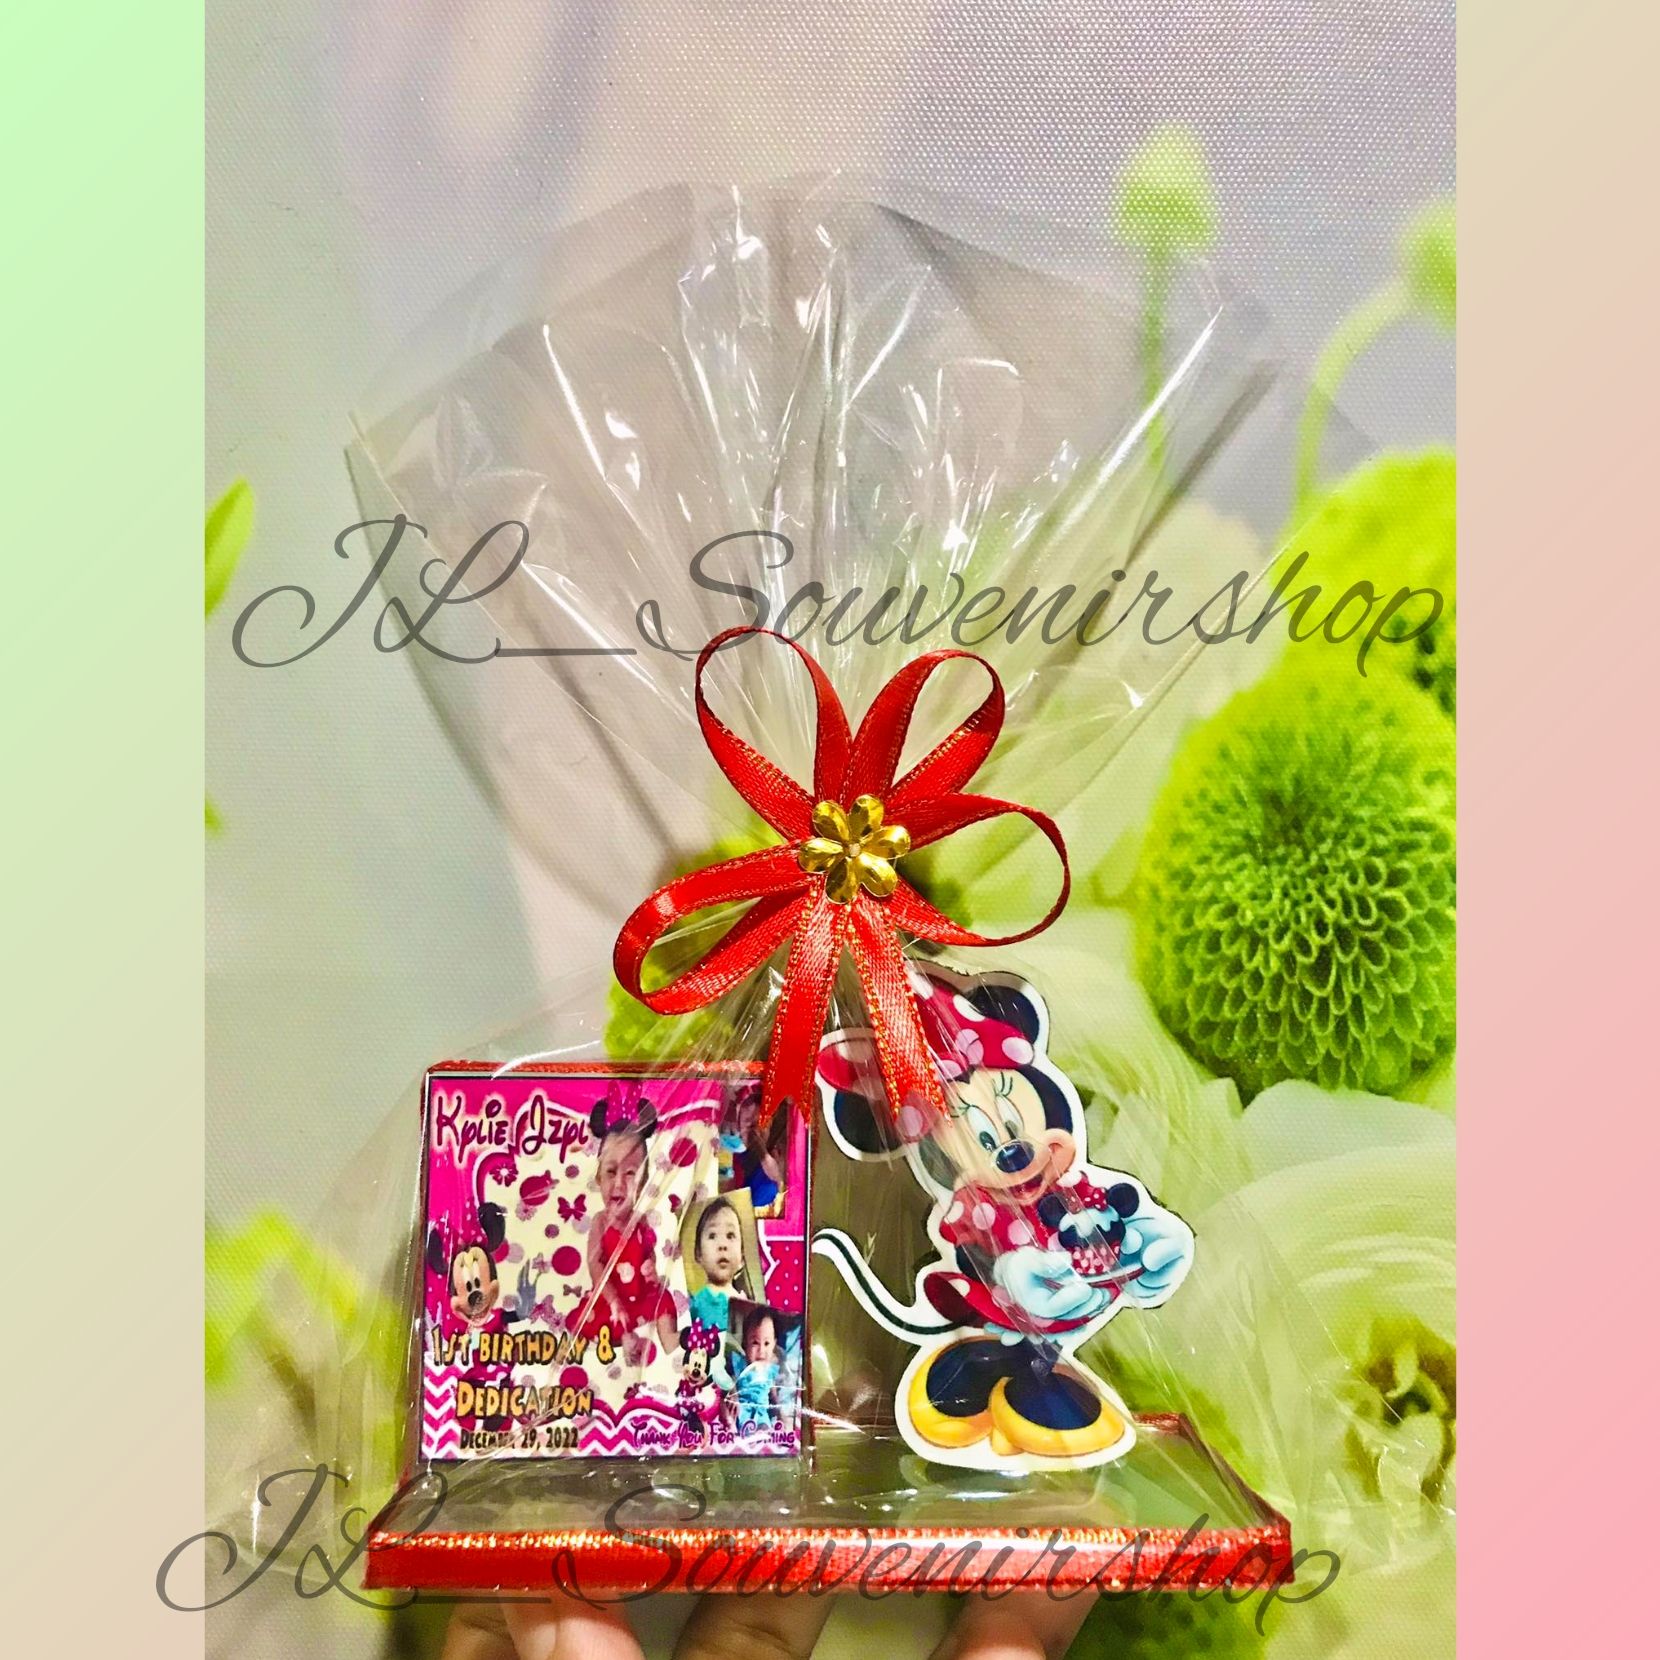 Minnie Mouse gift bag | Minnie mouse gifts, Mickey mouse gifts, Minnie mouse  birthday party